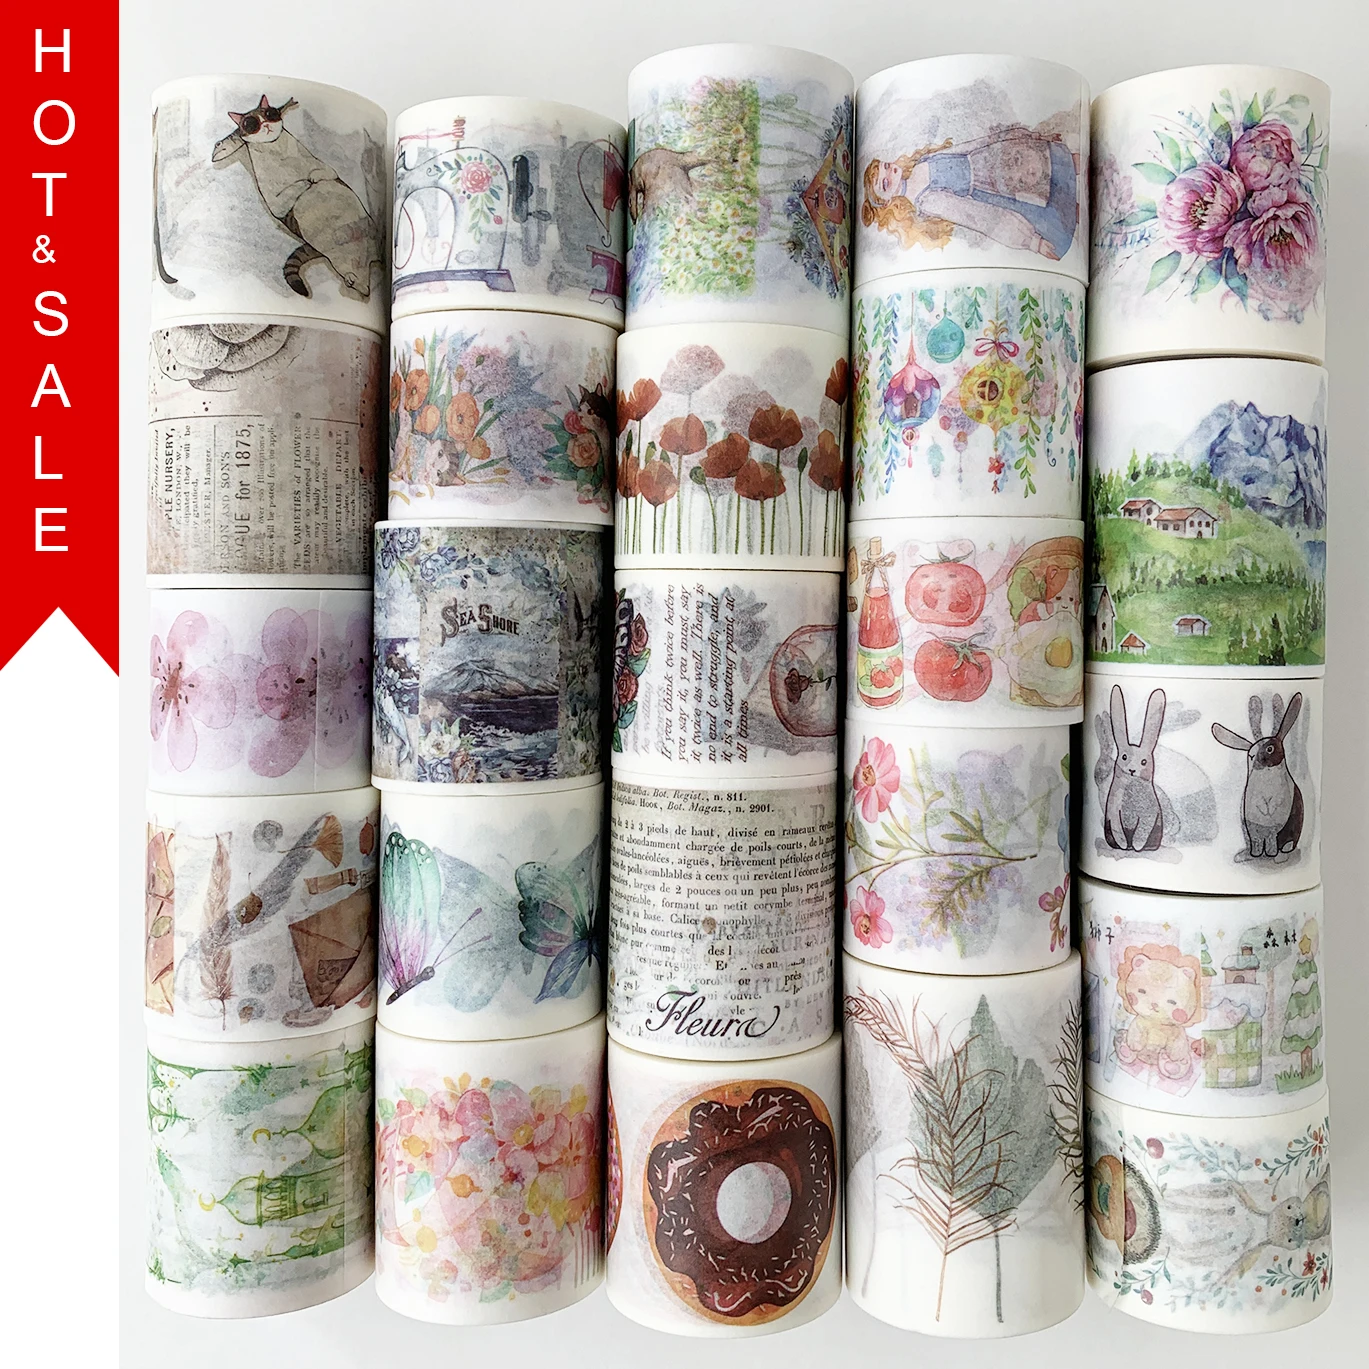 Free shipping washi tape,Techo tape,DIY craft masking tape,Scrapbook Diary gift,Many Coupons & flower patterns.HOT & SALE,9424